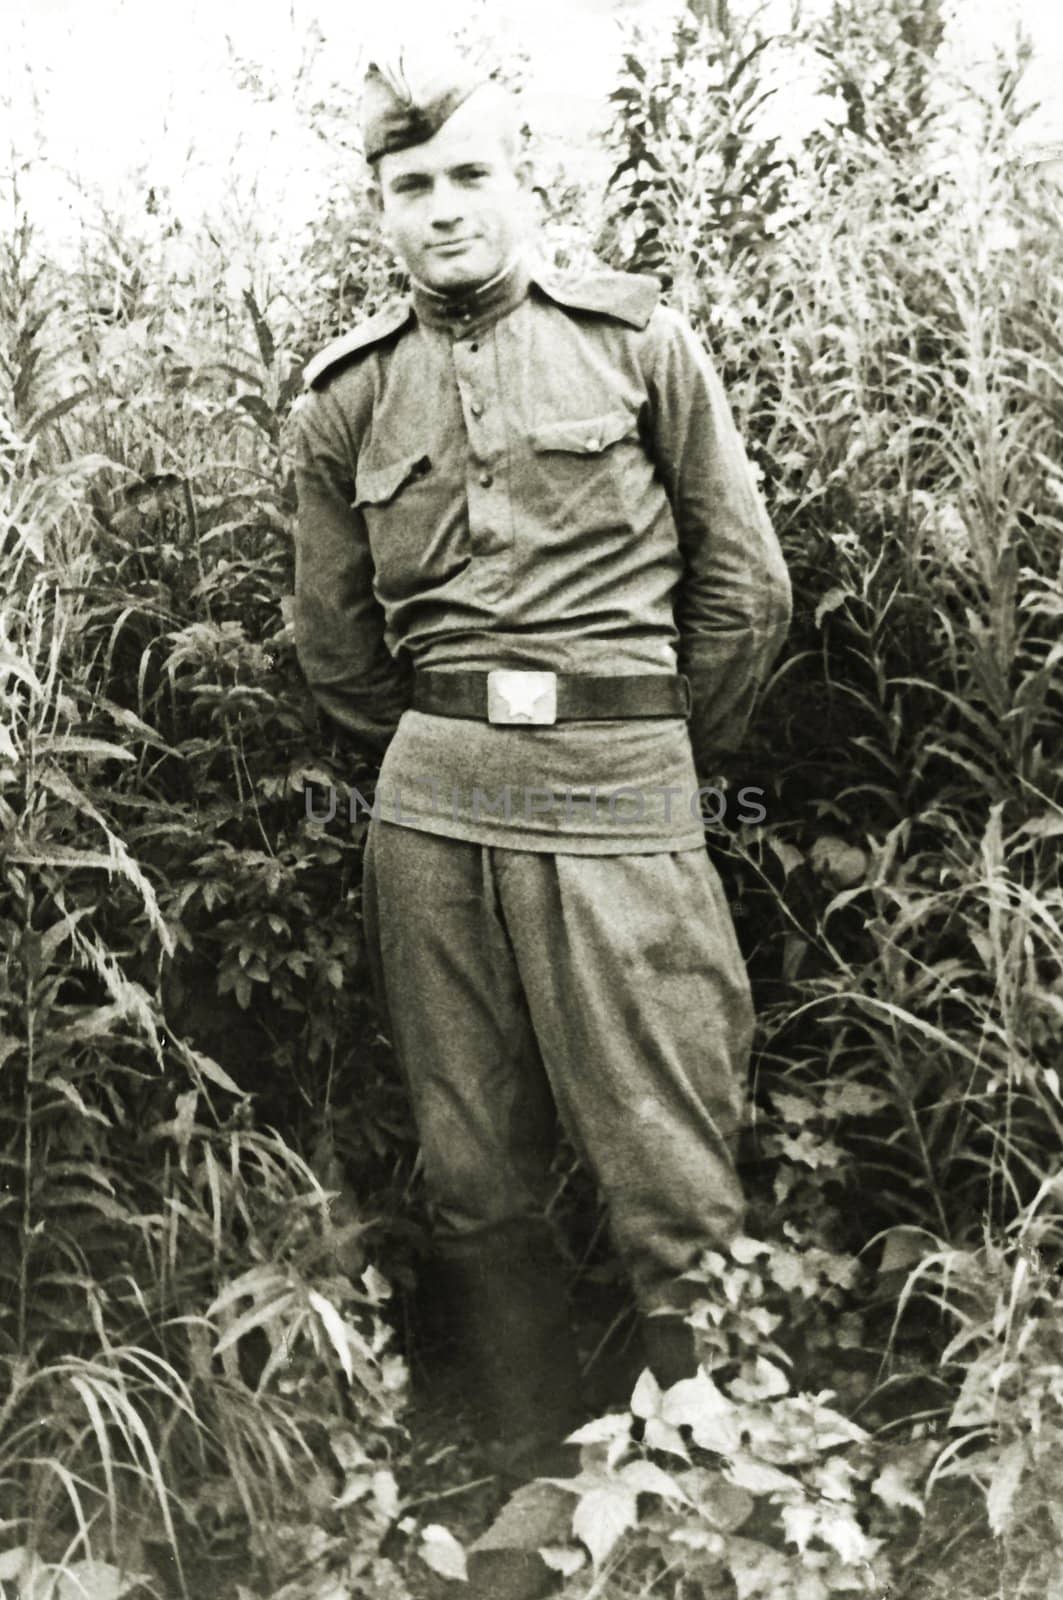 The Soviet soldier on an ancient photo of 1945